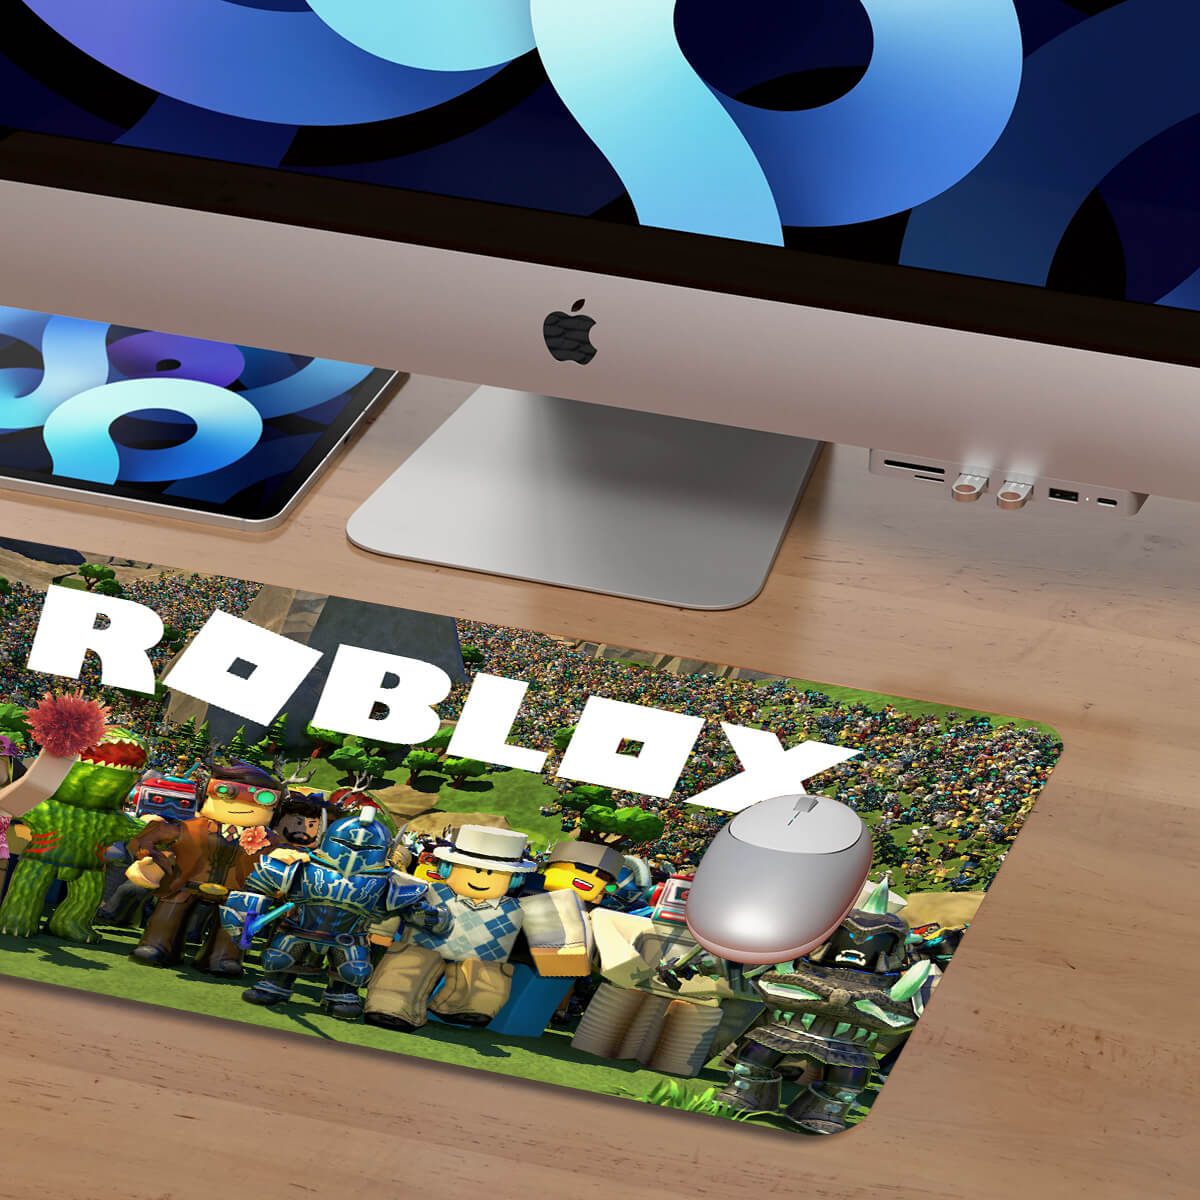 Roblox Mouse Pad Long